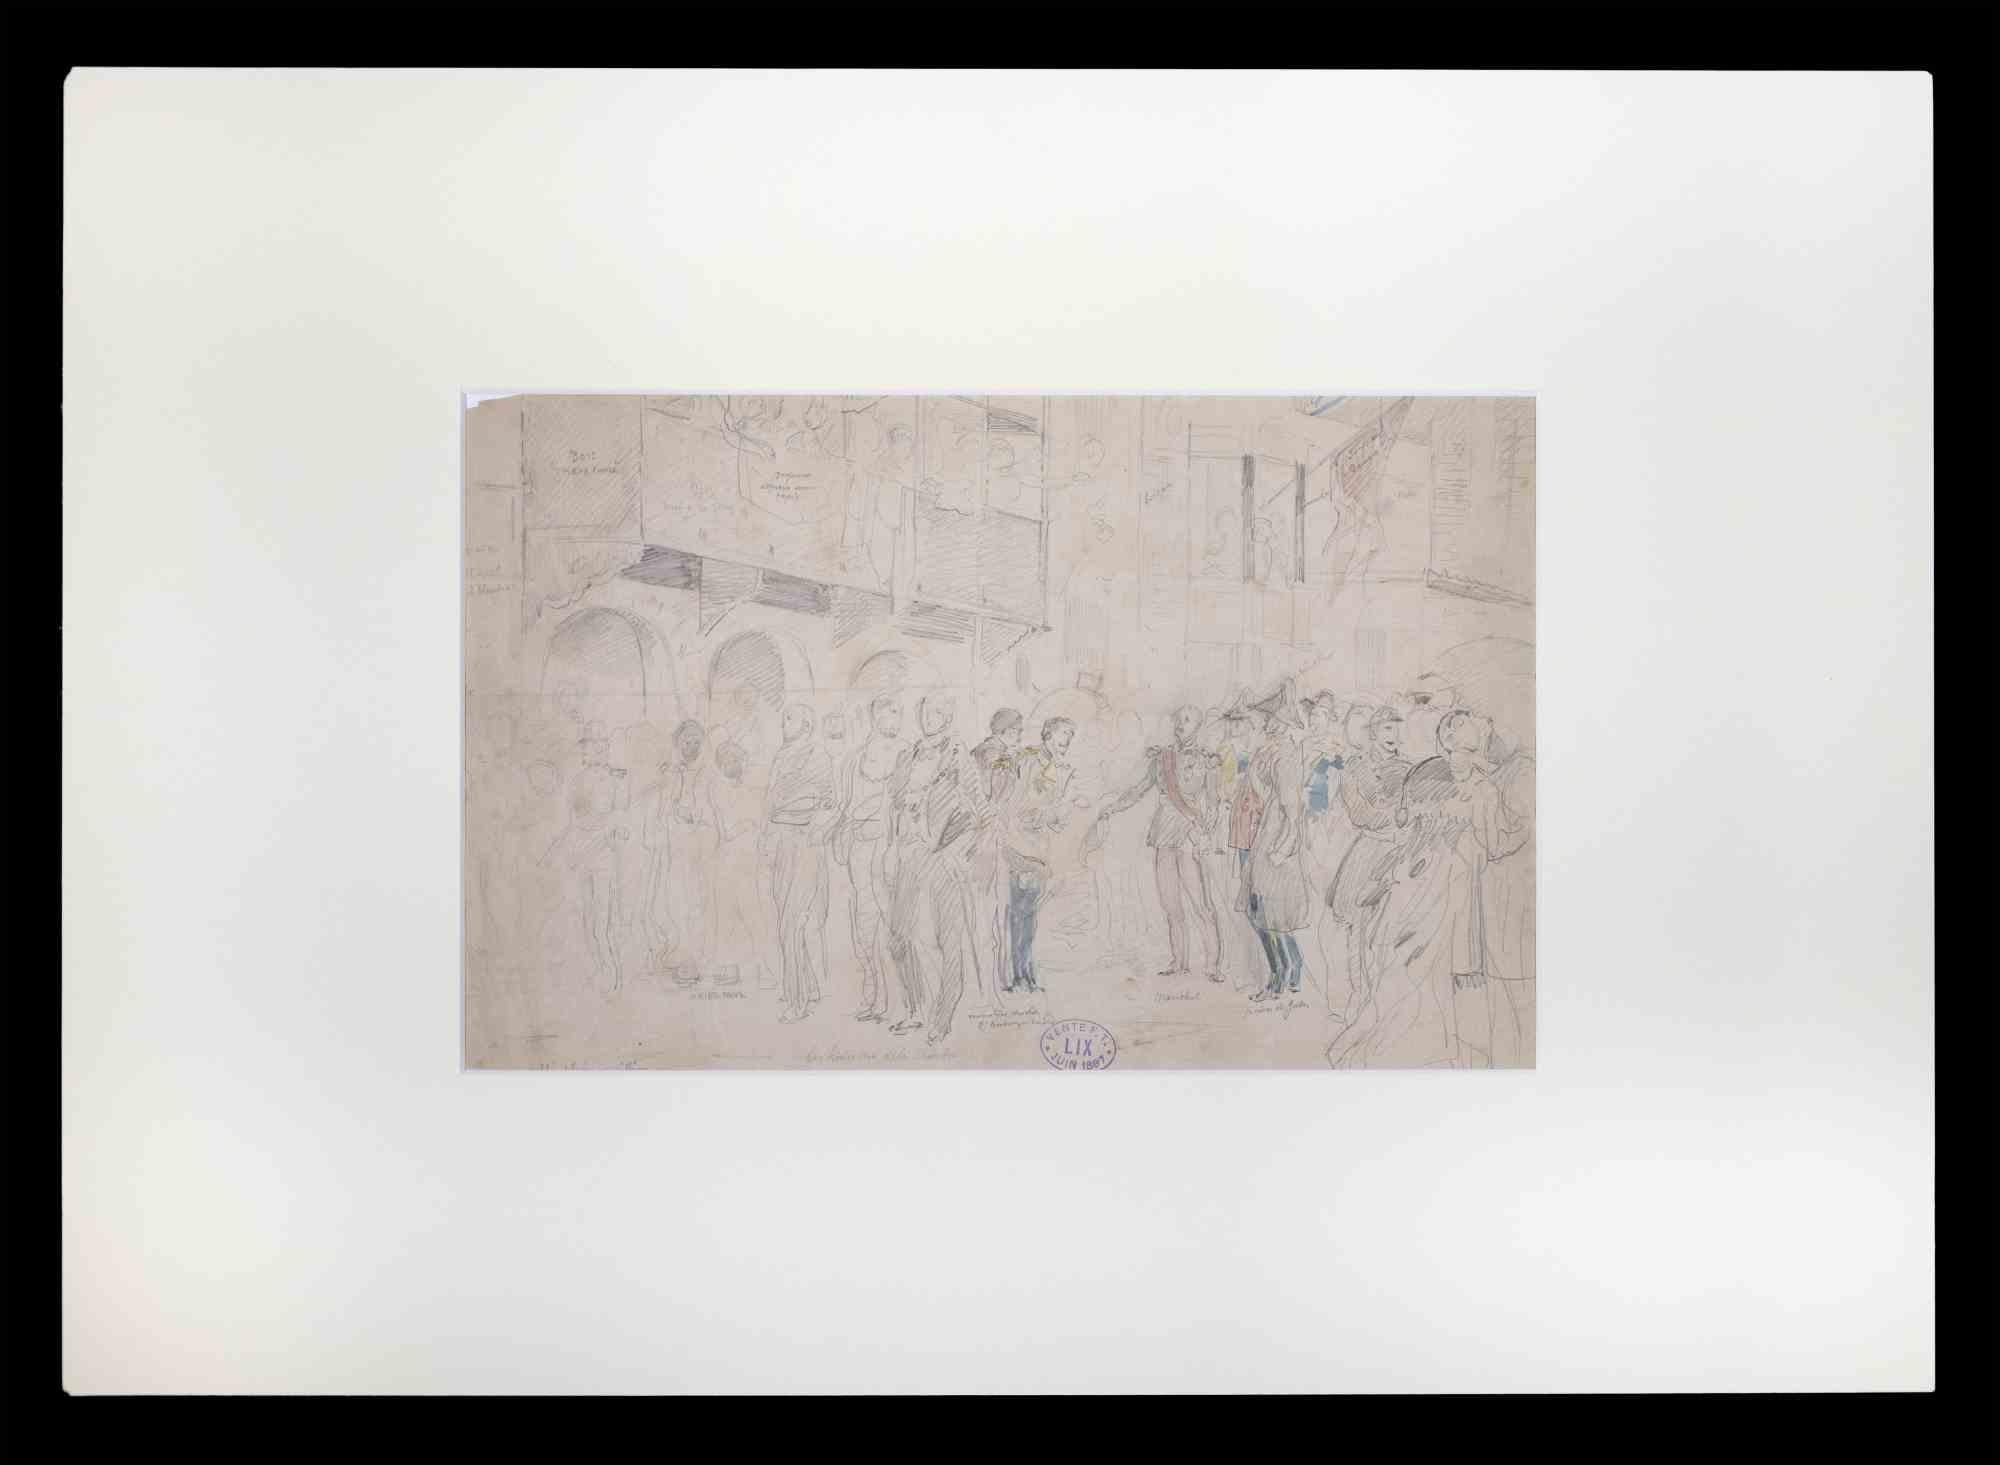 The Officers of the Chamber is an original drawing in pencil and watercolor and an important historical document realized by Frédéric Theodore Lix in 1891.

The artwork represents the women who greet the Prince of Wales during the visit to South